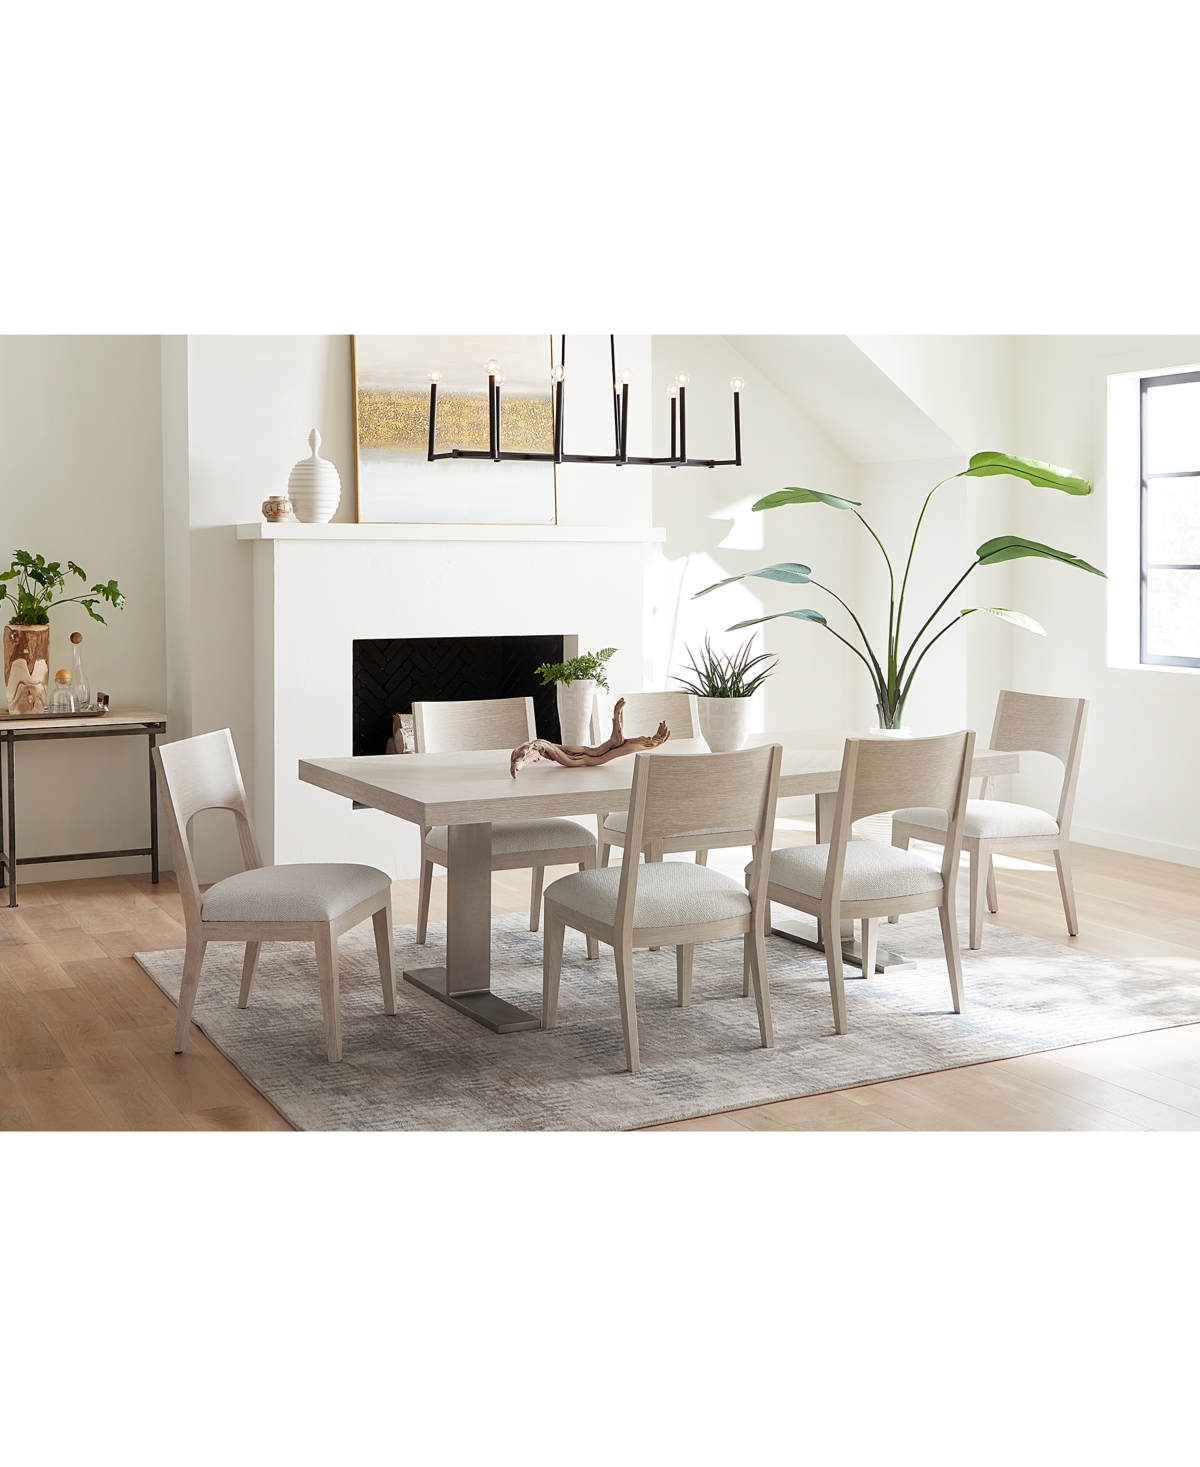 Bernhardt Solaria 7pc Dining Set (rectangular Table, 4 Side Chairs, & 2 Arm Chairs)